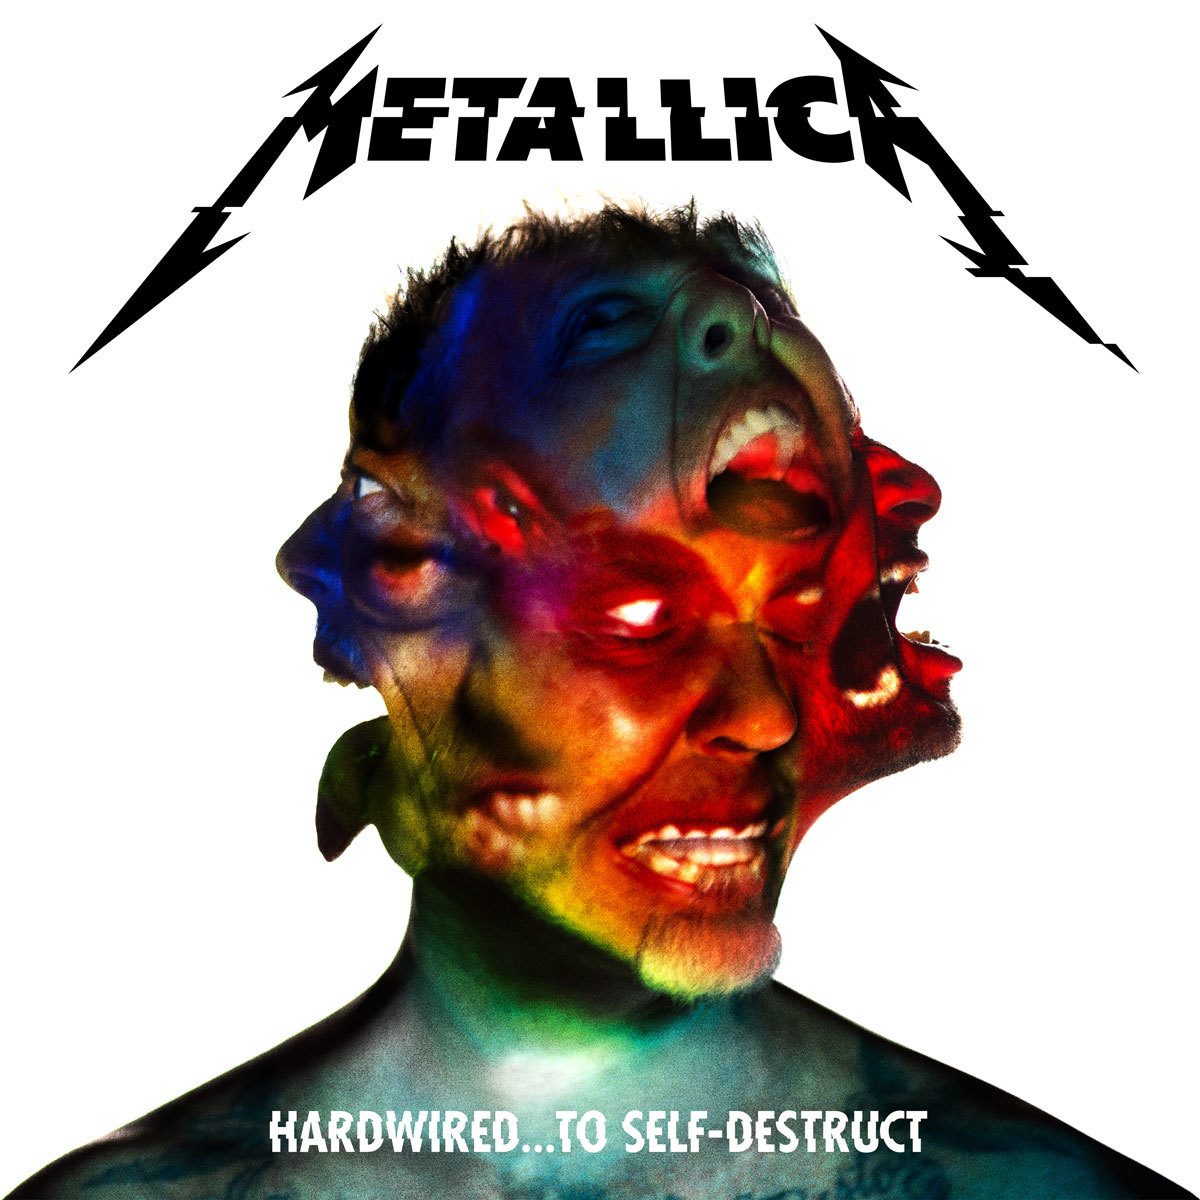 Metallica Gets Hardwired…. With Their First Album in Eight Years!